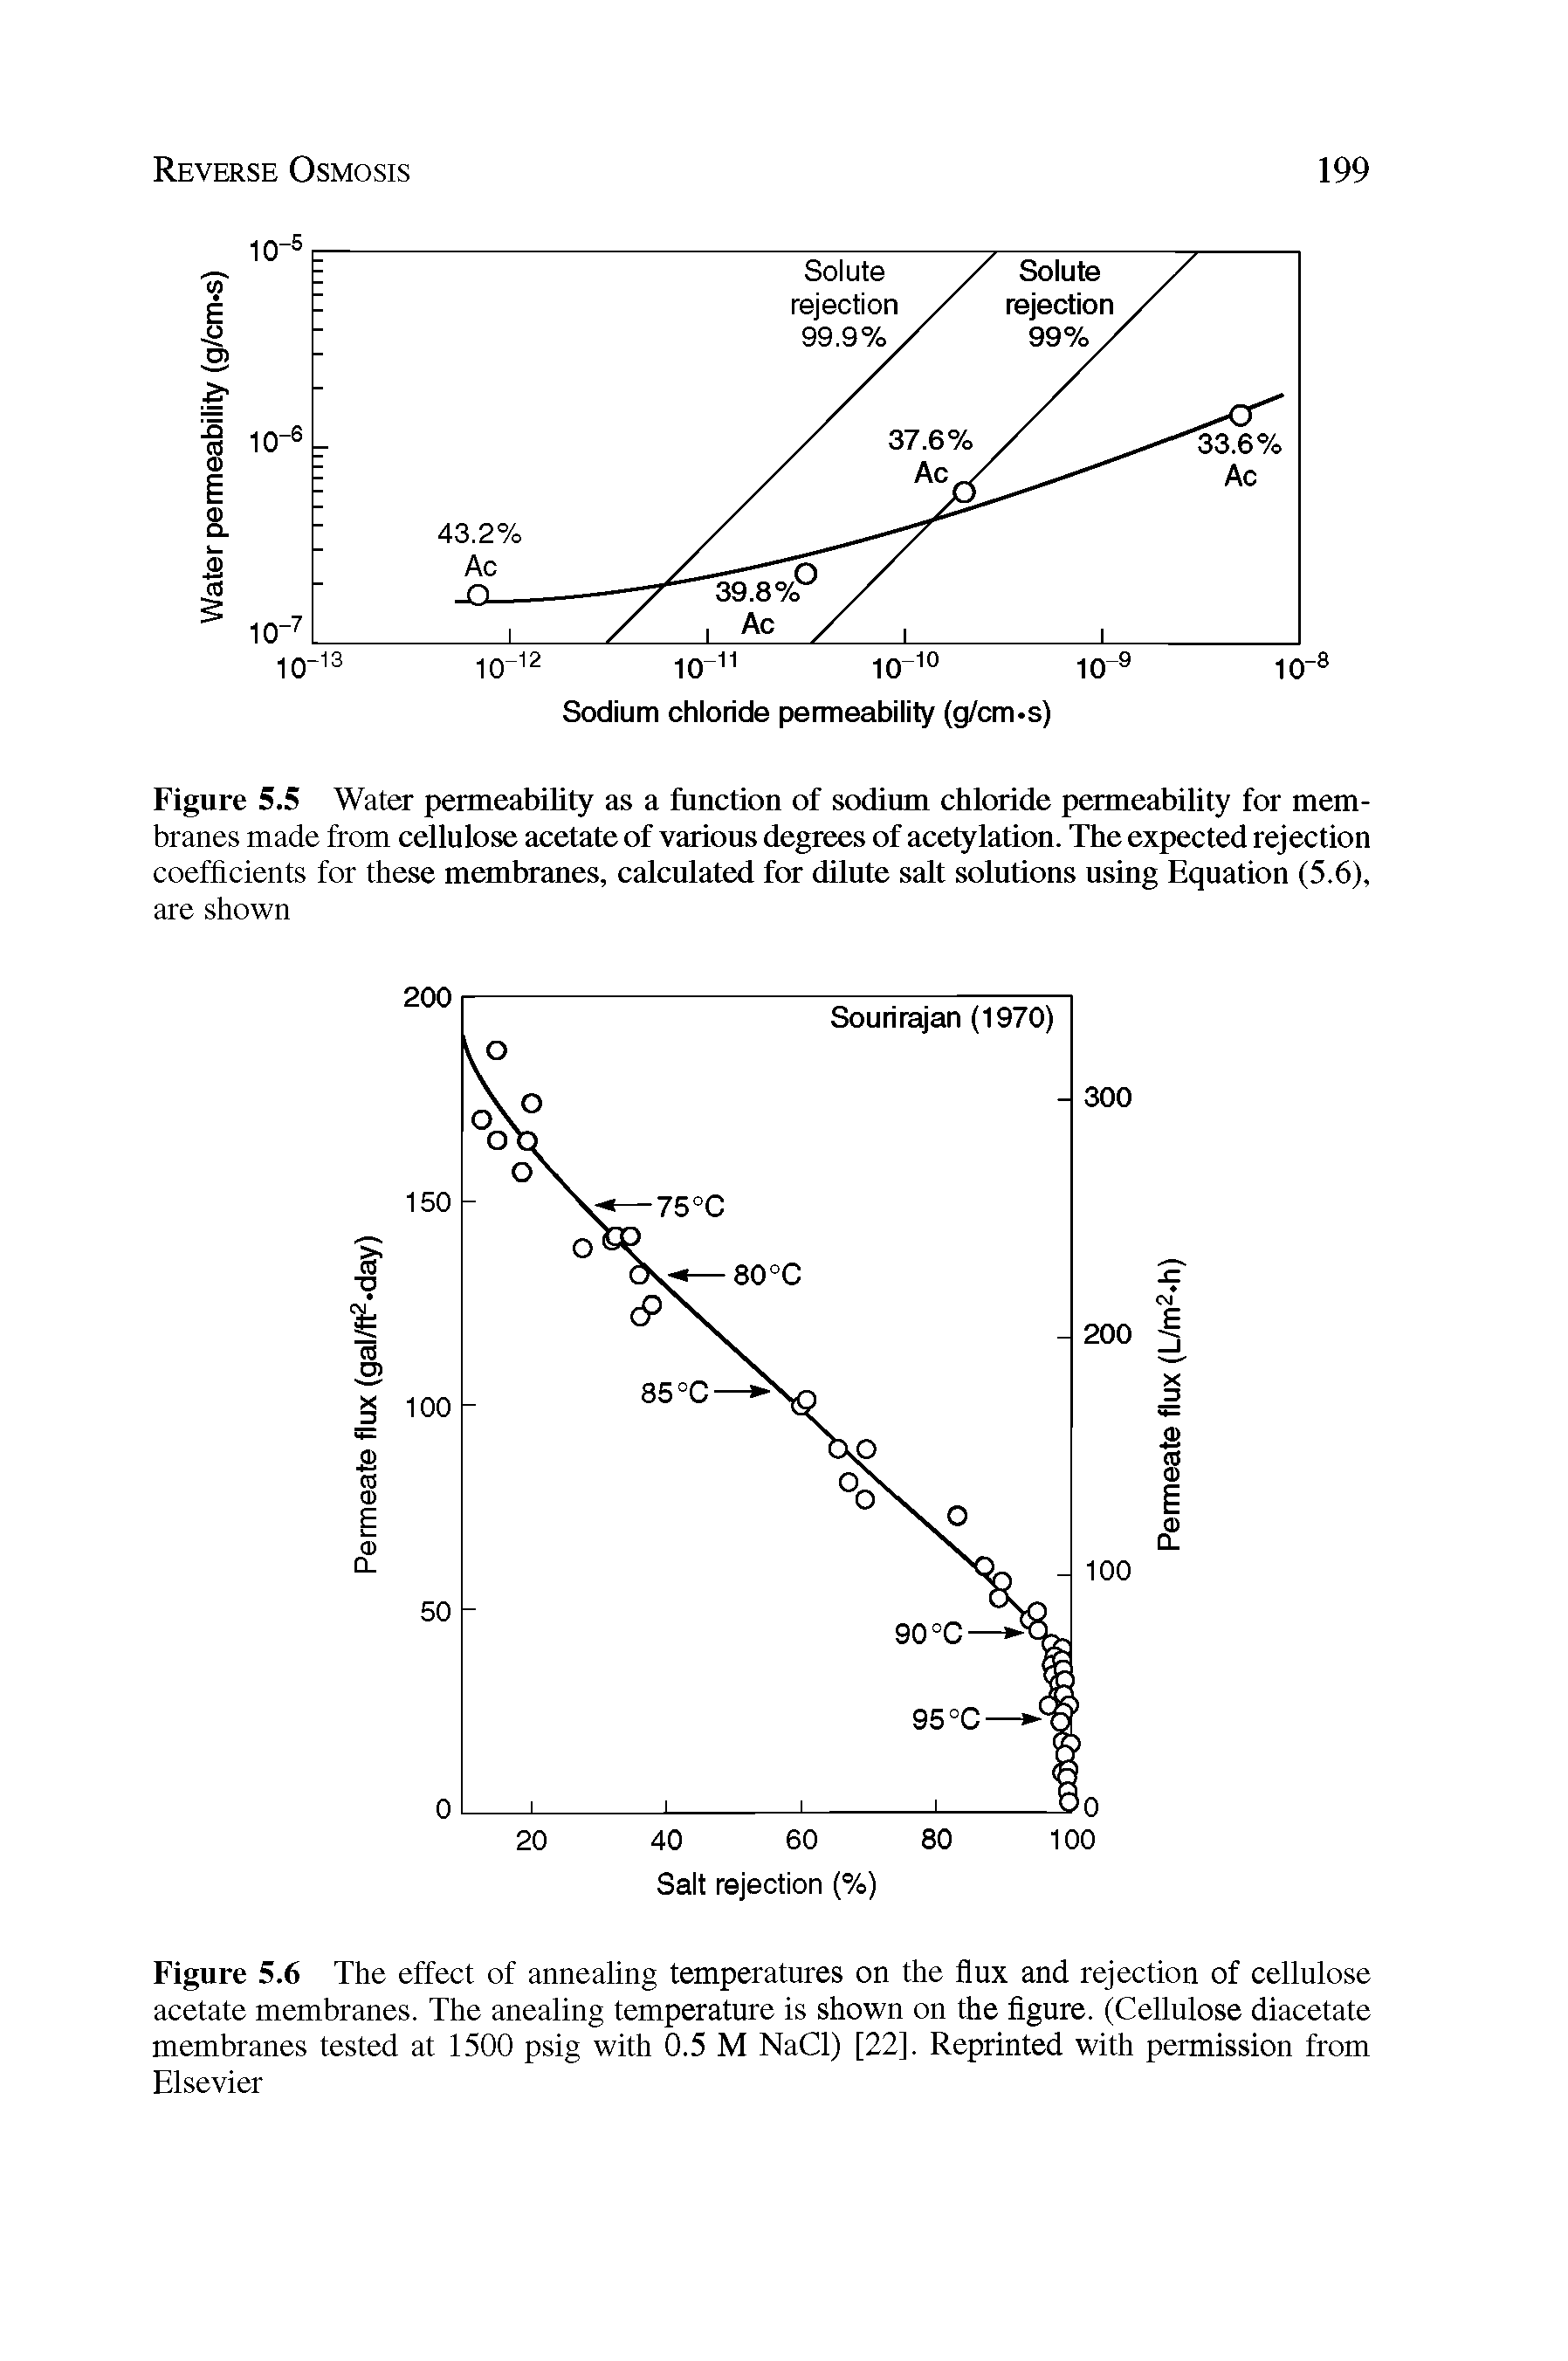 Figure 5.6 The effect of annealing temperatures on the flux and rejection of cellulose acetate membranes. The anealing temperature is shown on the figure. (Cellulose diacetate membranes tested at 1500 psig with 0.5 M NaCl) [22]. Reprinted with permission from Elsevier...